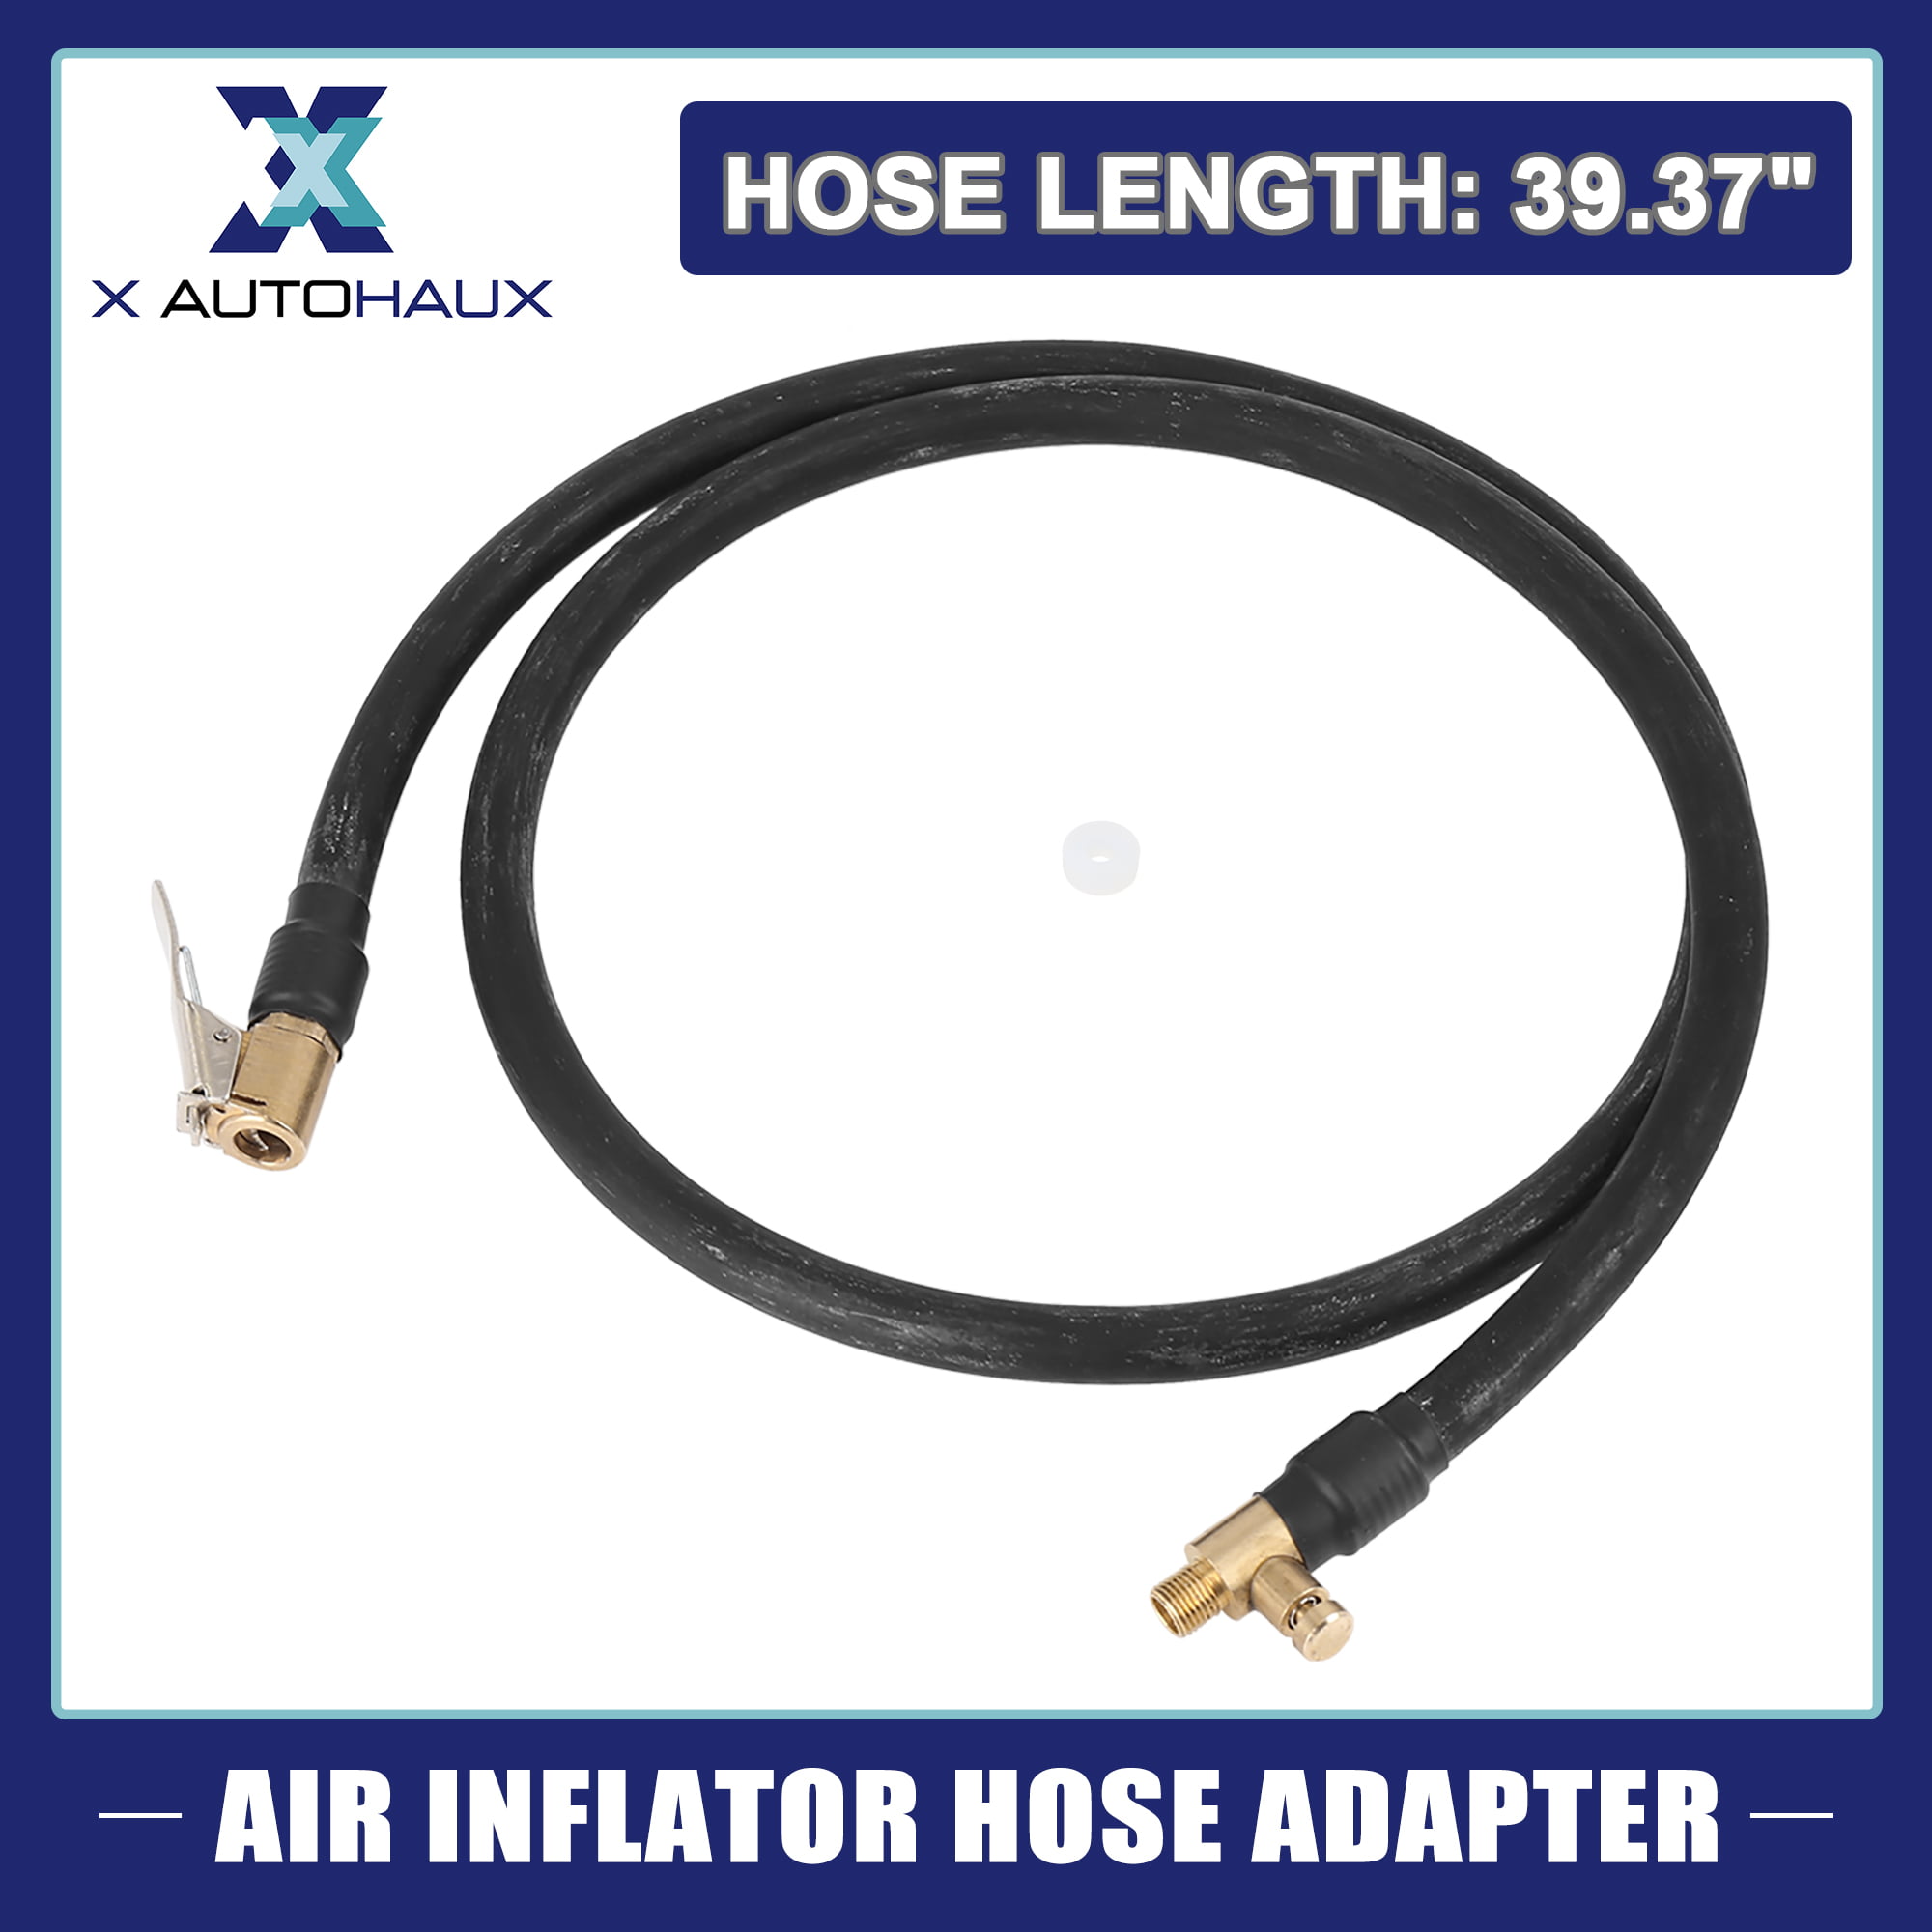 X AUTOHAUX 60cm M8x0.8 2-in-1 Multifunctional Car Tyre Inflator Hose Adapter 